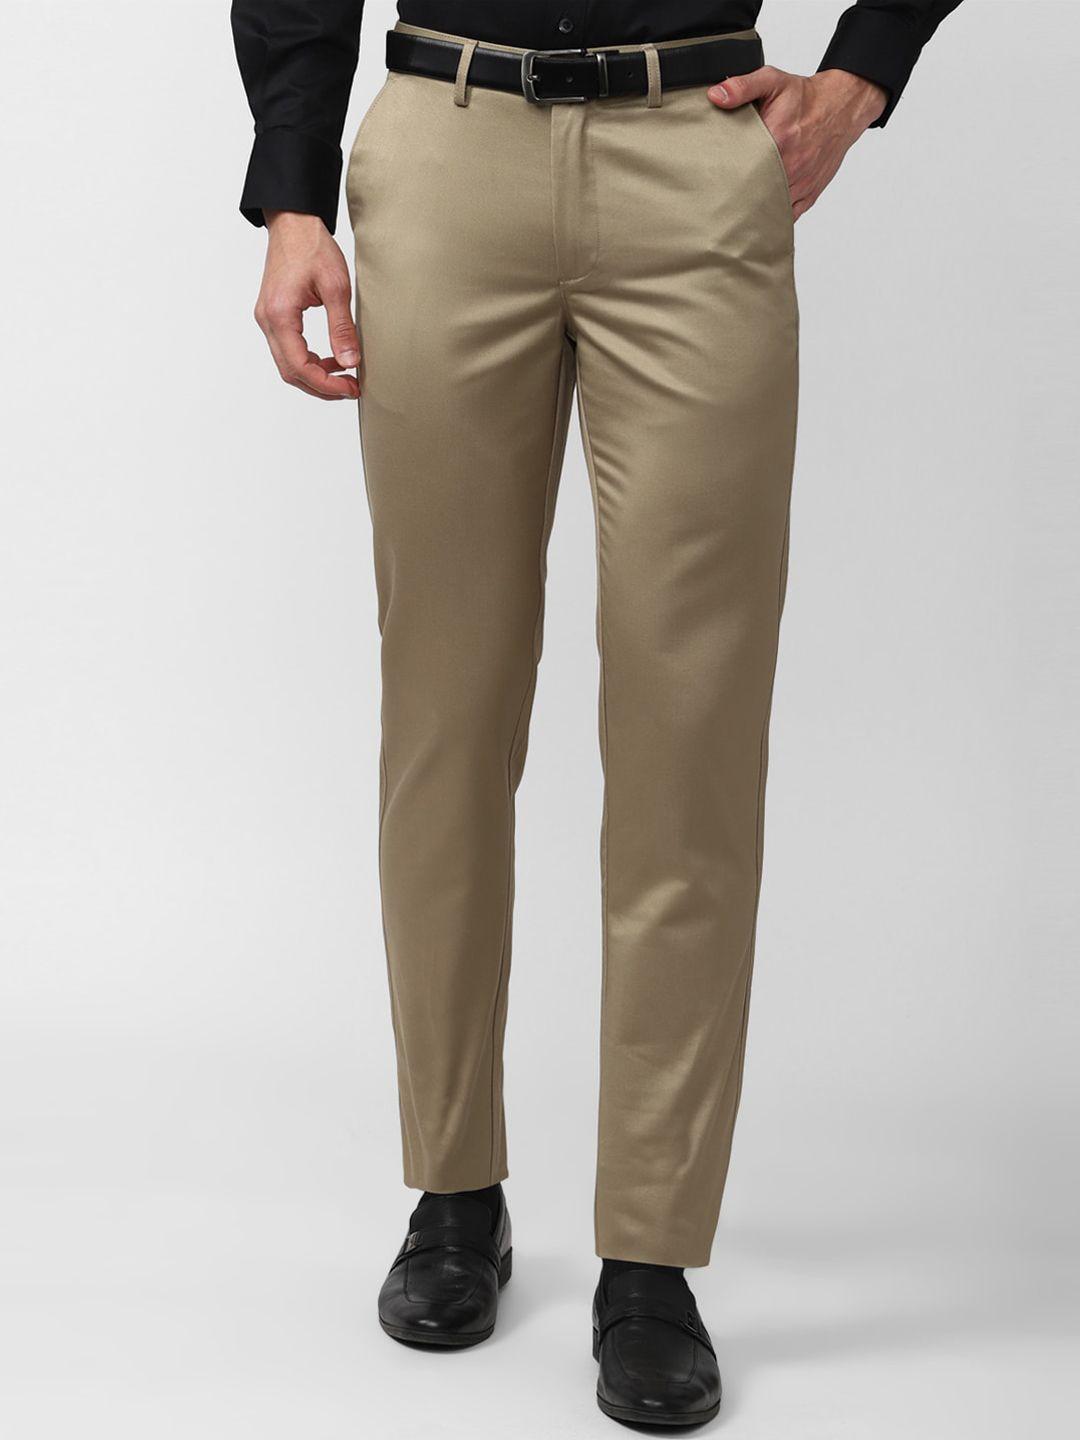 peter england casuals men slim fit trousers